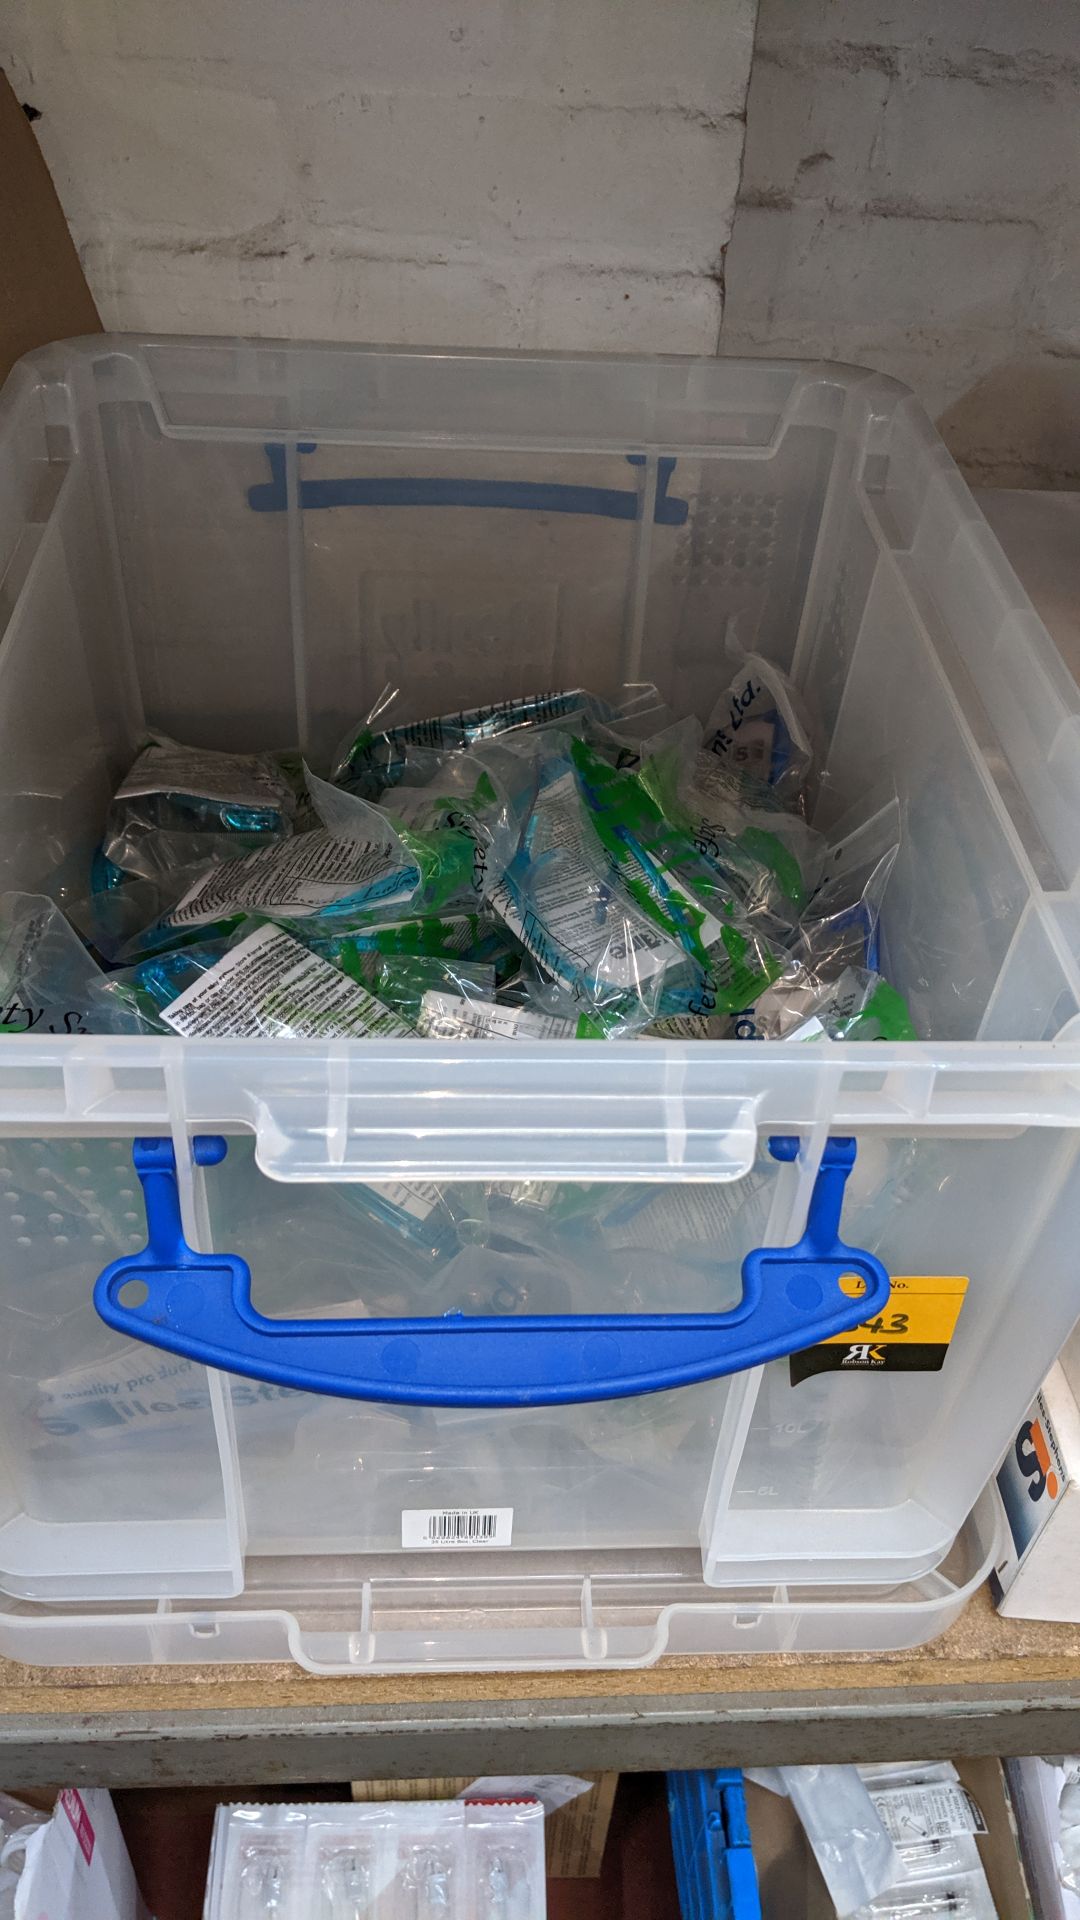 Contents of a crate of safety goggles - crate excluded. This is one of a large number of lots used/